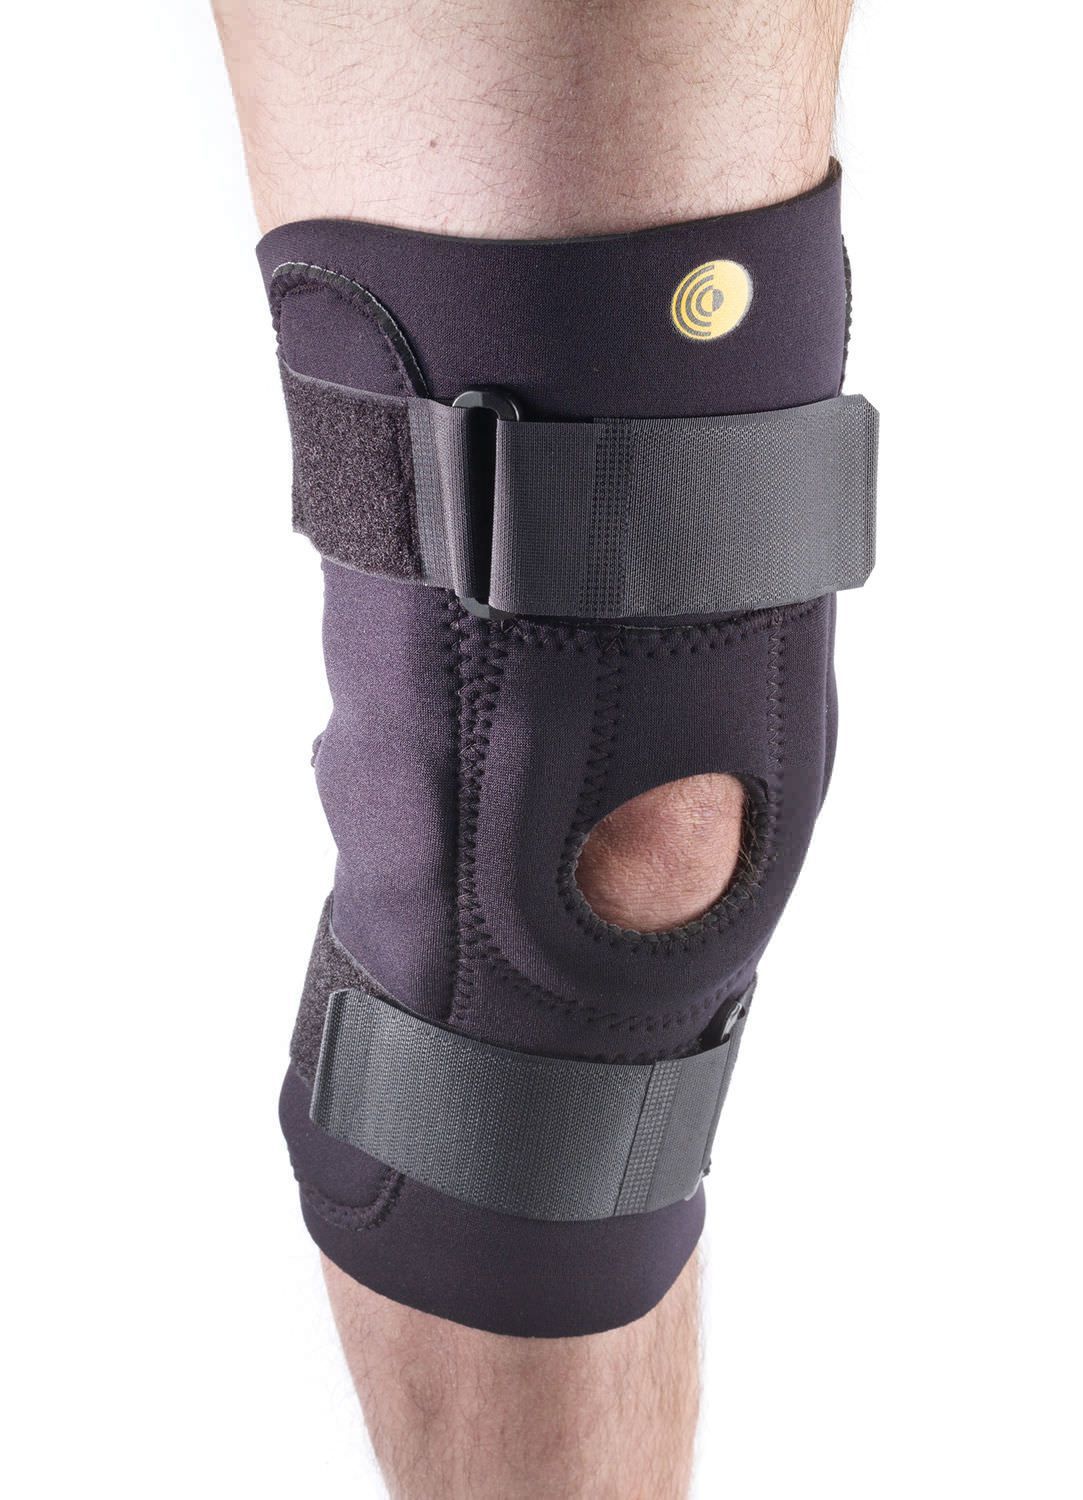 Knee orthosis (orthopedic immobilization) / with patellar buttress / articulated 88-5155 Corflex